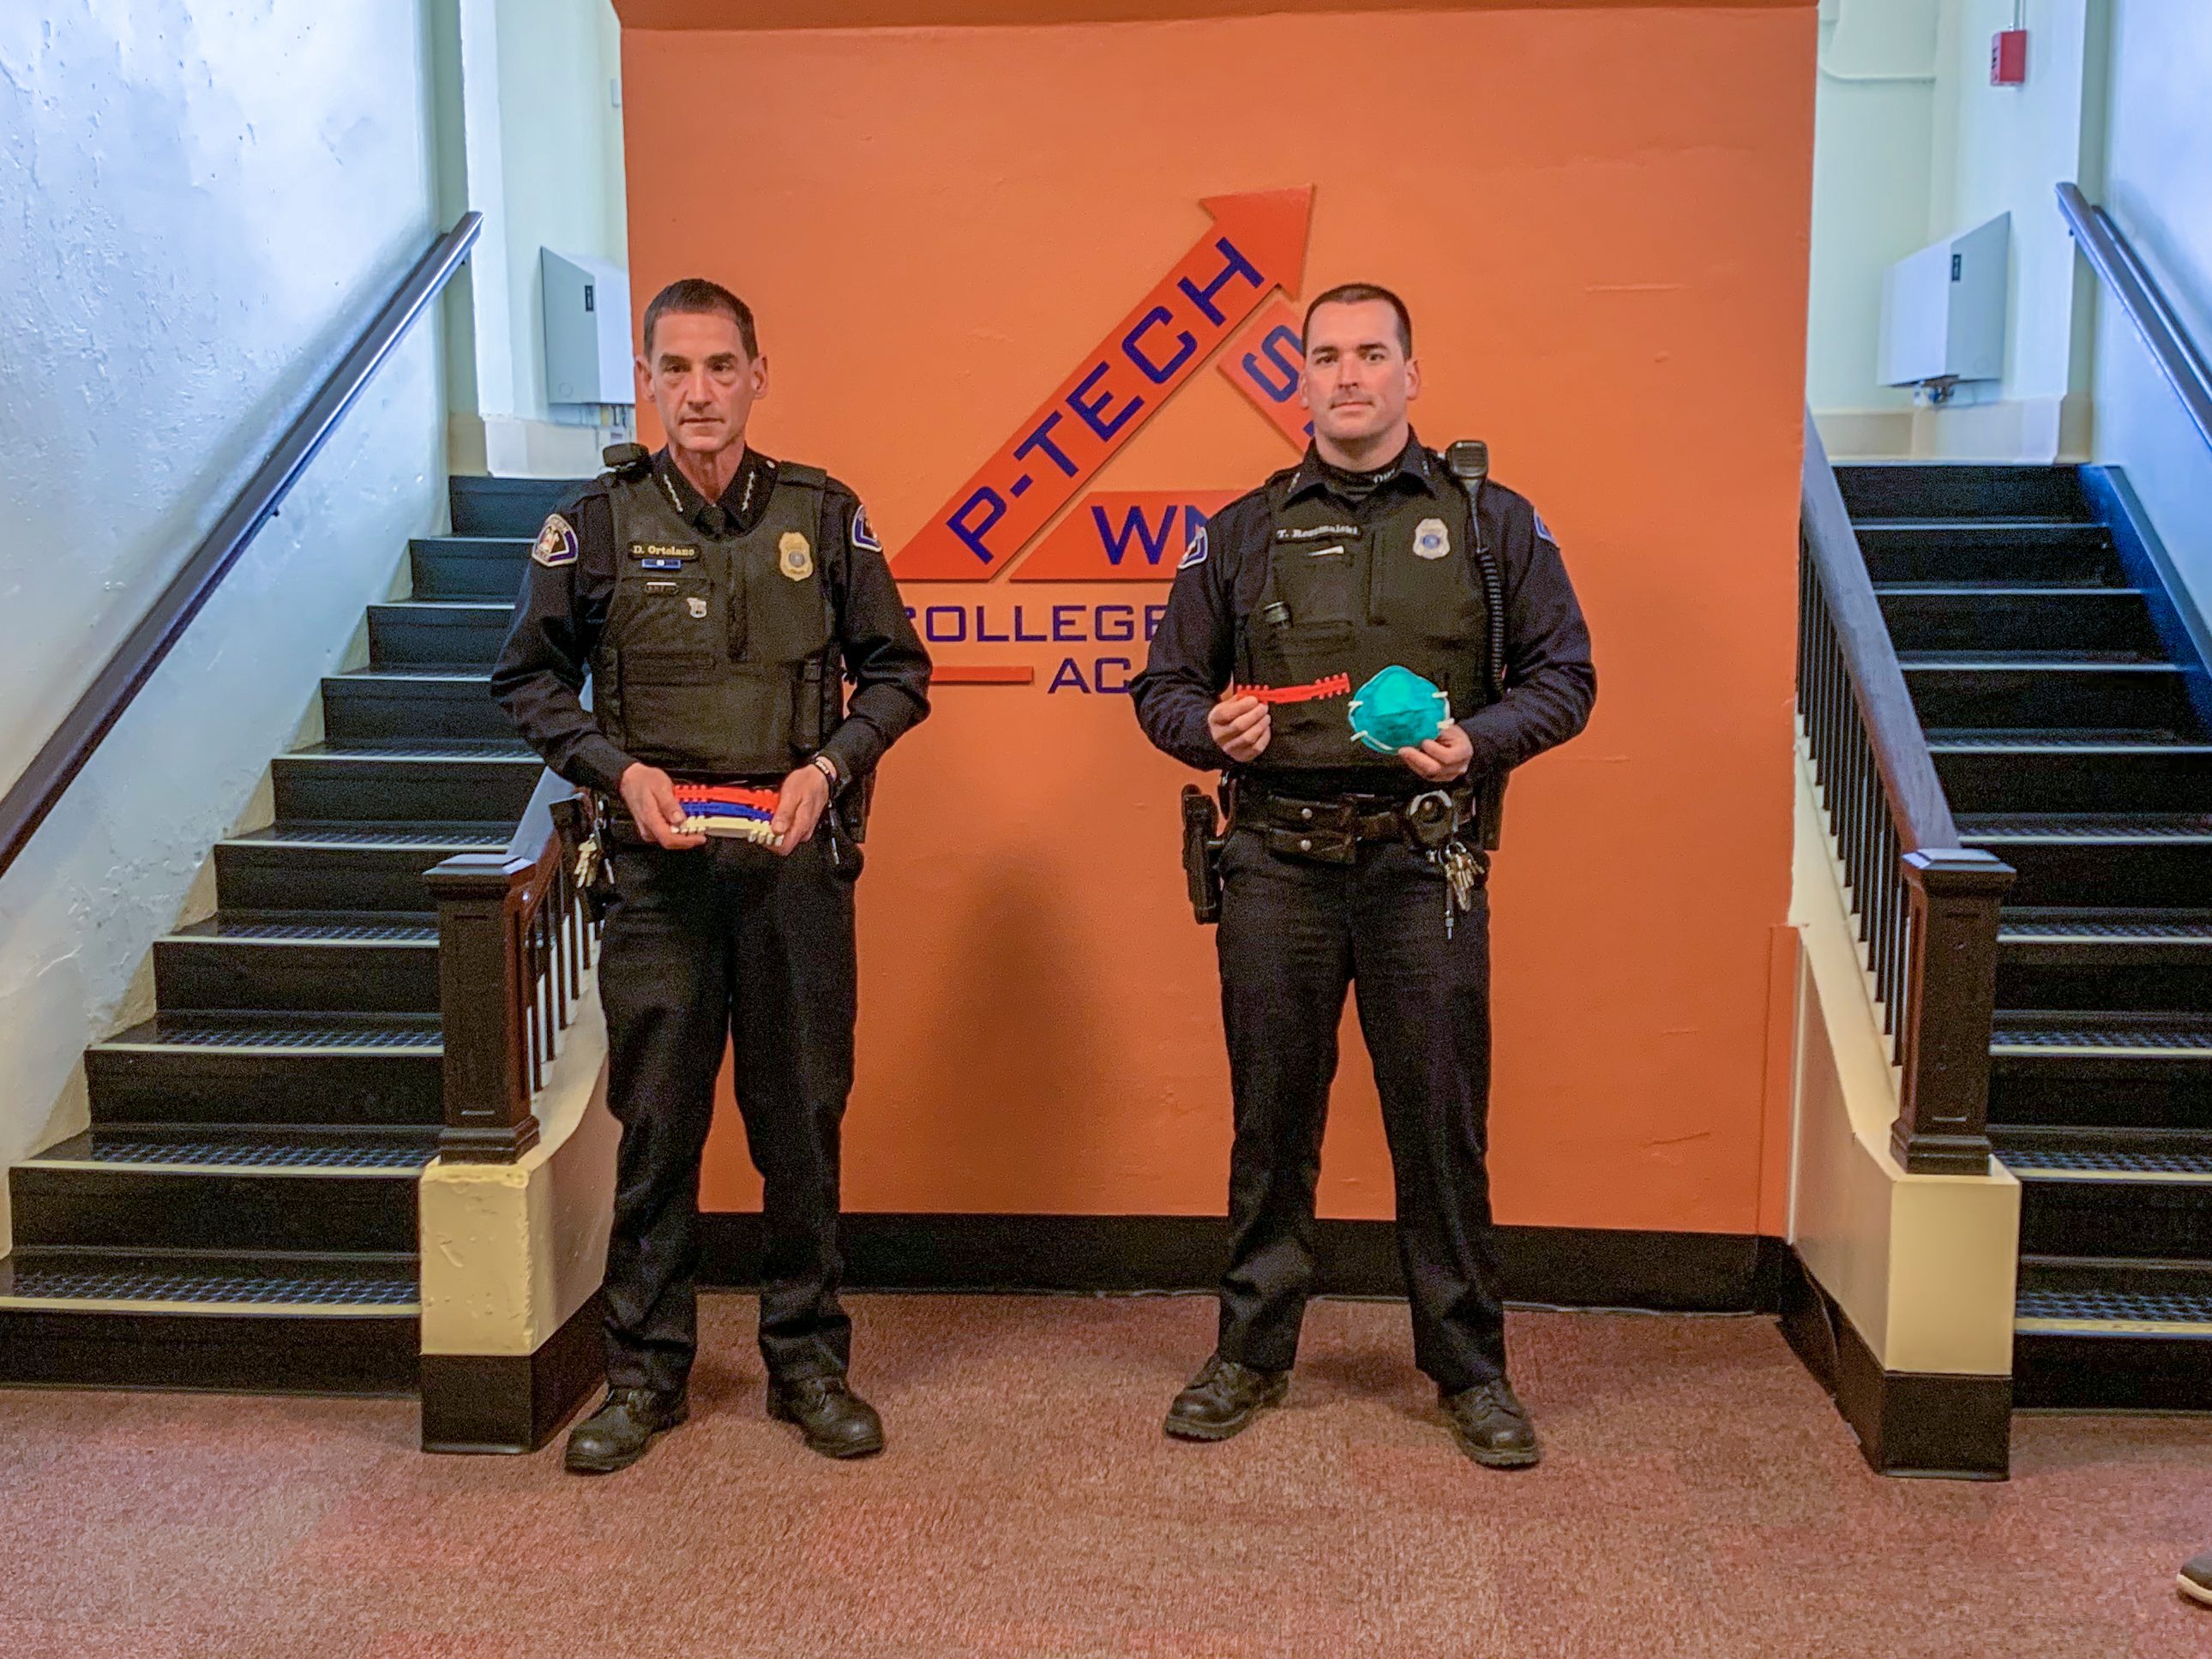 WNY P-TECH College and Career Academy donated more than 220 specially-designed ear guards to the Dunkirk Fire Department, Dunkirk Police Department, Brooks Memorial Hospital, Elliot Hospital in New Hampshire and Mount Sinai Hospital in New York City. Accepting the donation on behalf of the Dunkirk Police Department were Chief David Ortolano and officer Thomas Rozumalski. Pictured, from left, are Matt Edwards, P-TECH math teacher; Ortolano; Rozumalksi; and Nick Anson, P-TECH CADD teacher.